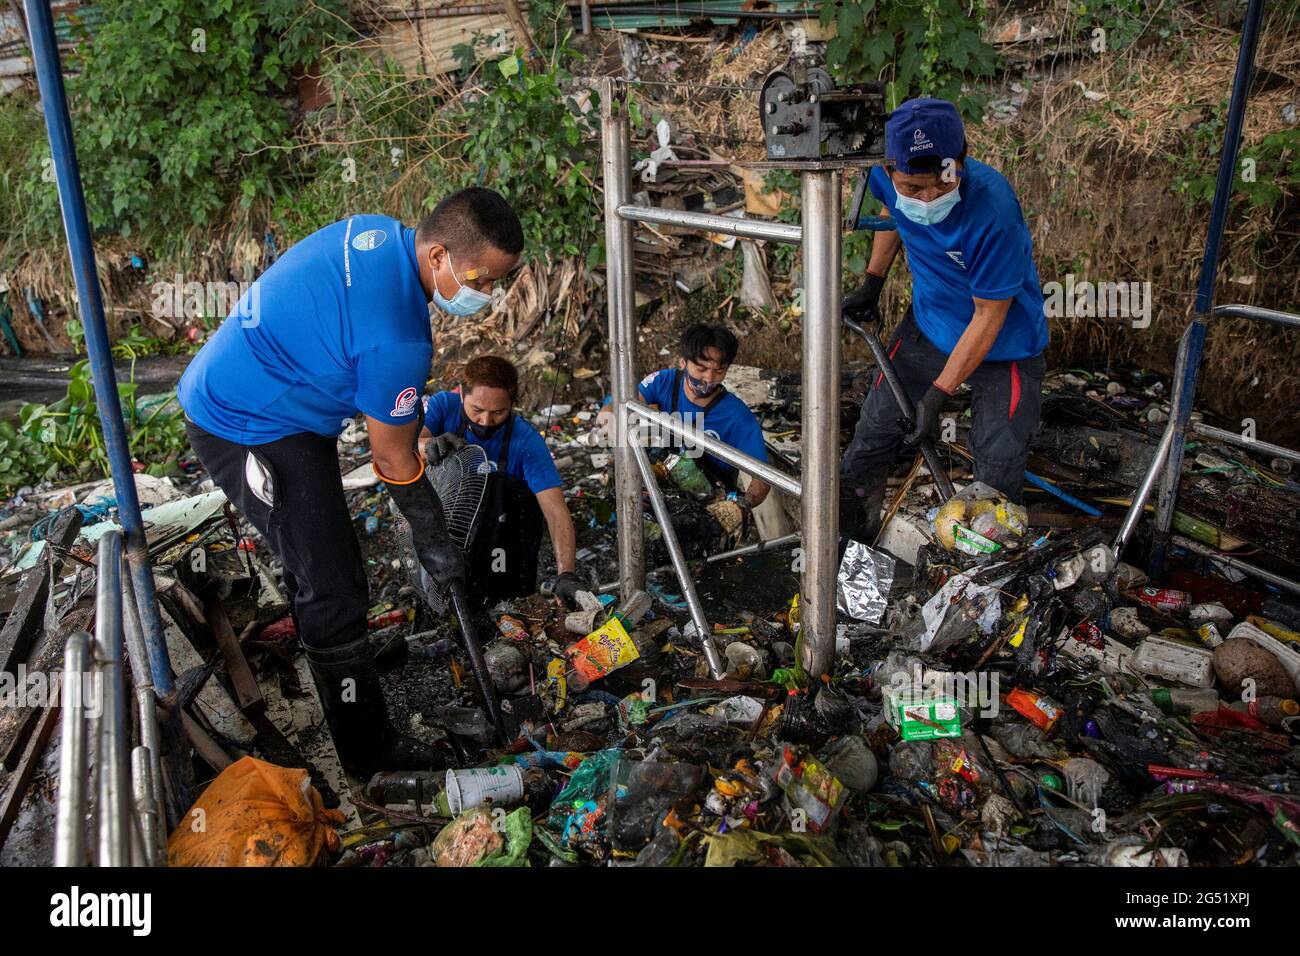 Members of the River Warriors gather trash to a 'trash boat' from the heavily polluted San Juan River, a tributary of Pasig River, in Mandaluyong City, Philippines, June 21, 2021. The 'River Warriors' is a group of volunteers founded over a decade ago whose sole purpose was to pick up garbage in and around Manila's Pasig River. Picture taken June 21, 2021. REUTERS/Eloisa Lopez Stock Photo